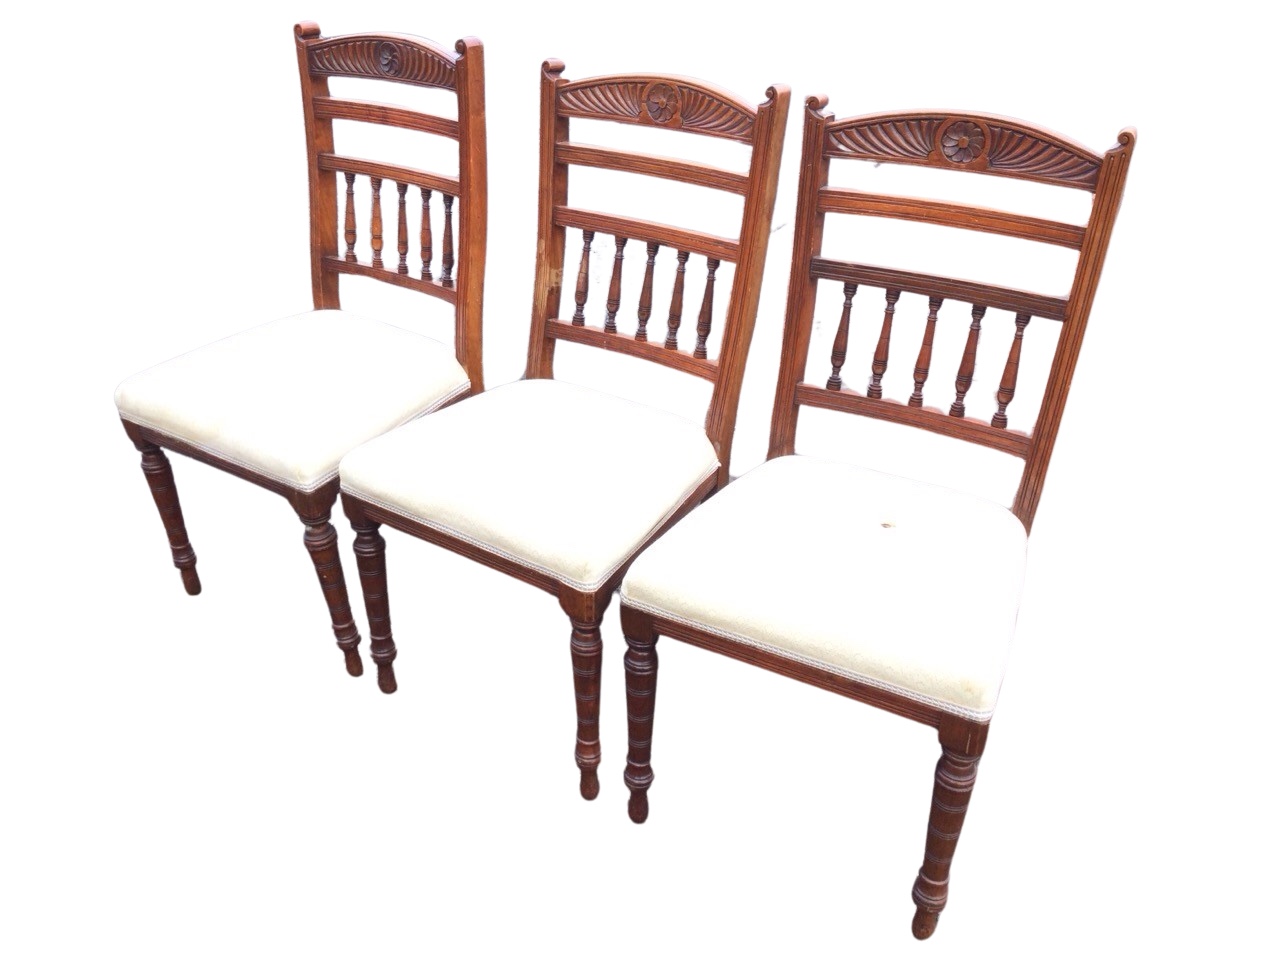 A set of three Edwardian mahogany chairs with arched gadrooned carved backs and central